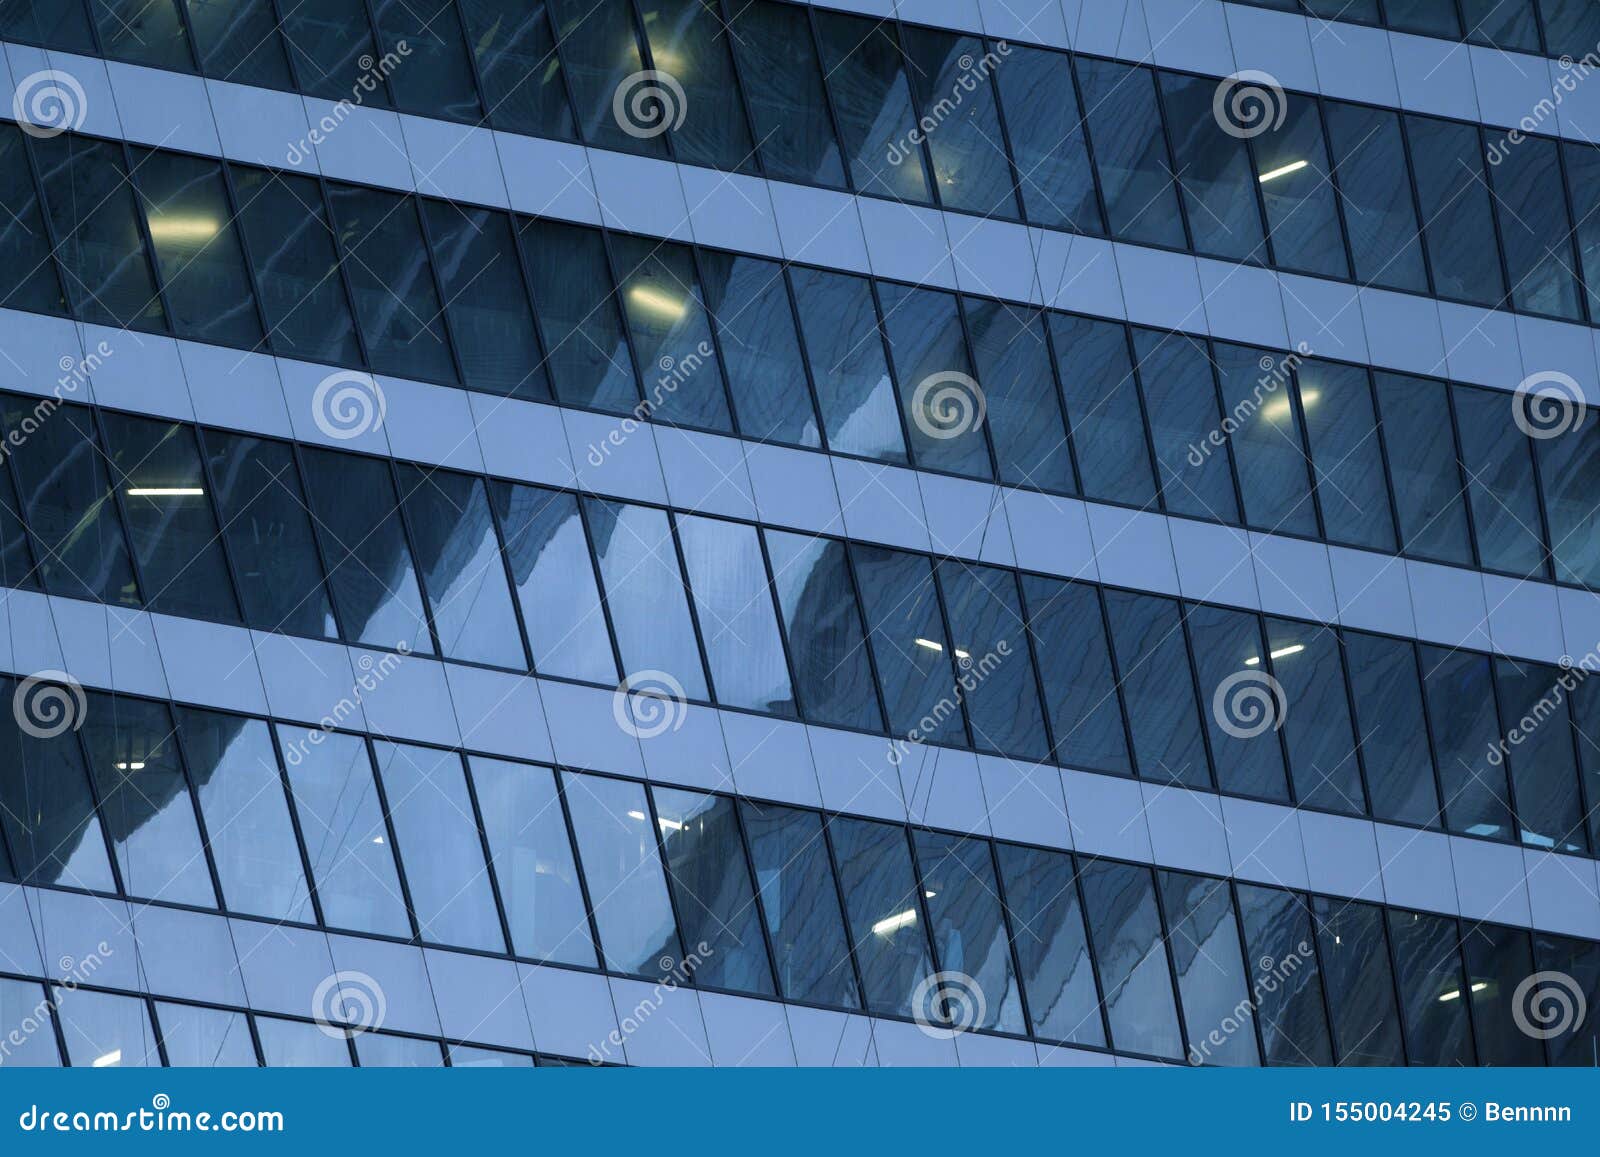 Modern Futuristic Glass Building Abstract Background. Stock Image ...